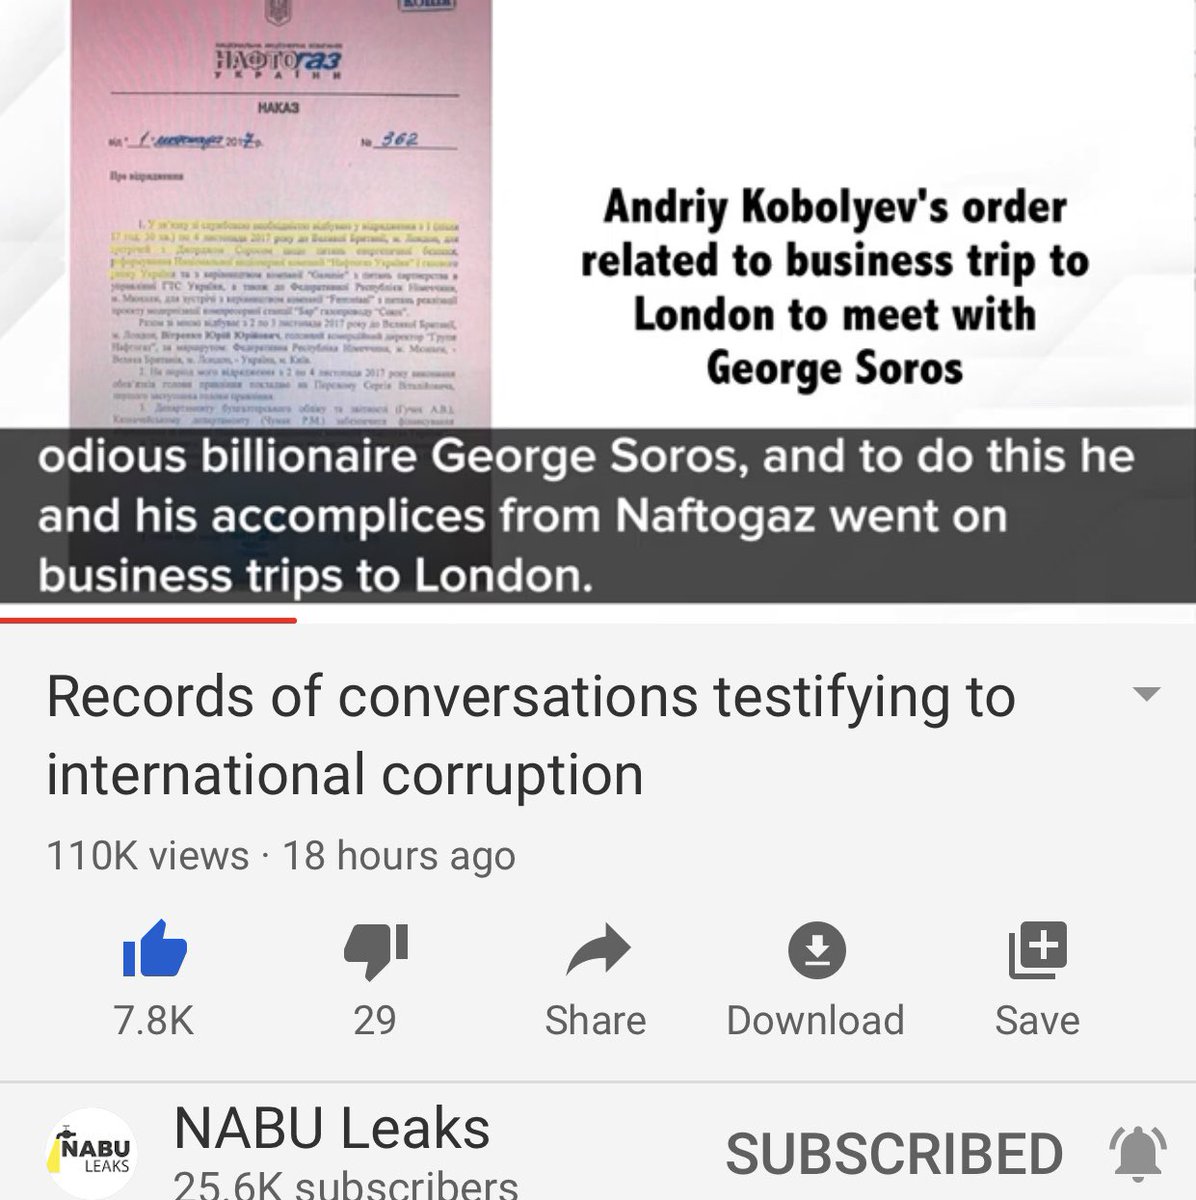 Here’s a familiar name: George Soros, who’s also balls deep in the corruption. Shocker. He’s also still discussing how taxpayer $ ended up in the hands of Biden & others